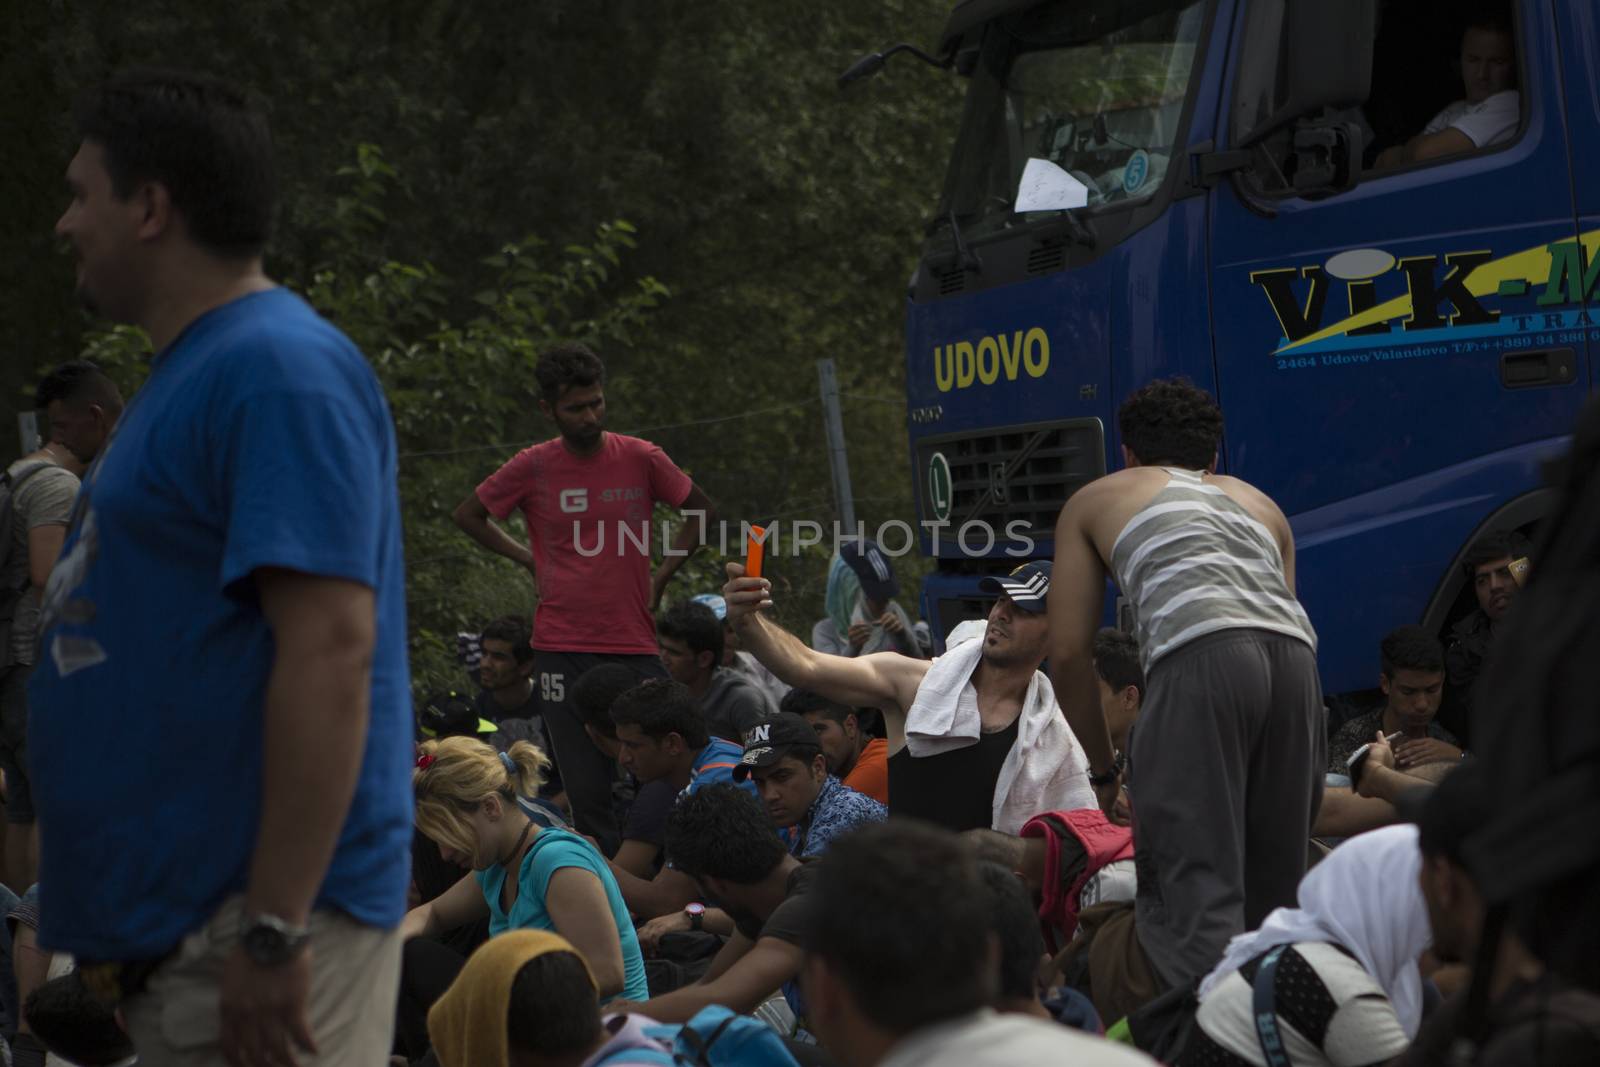 SERBIA, Horgos: A refugee takes a photo of himself as he and other refugees wait at the Serbia-Hungary border, blocking traffic, after Hungary closed the border crossing on September 16, 2015.****Restriction: Photo is not to be sold in Russia or Asia****